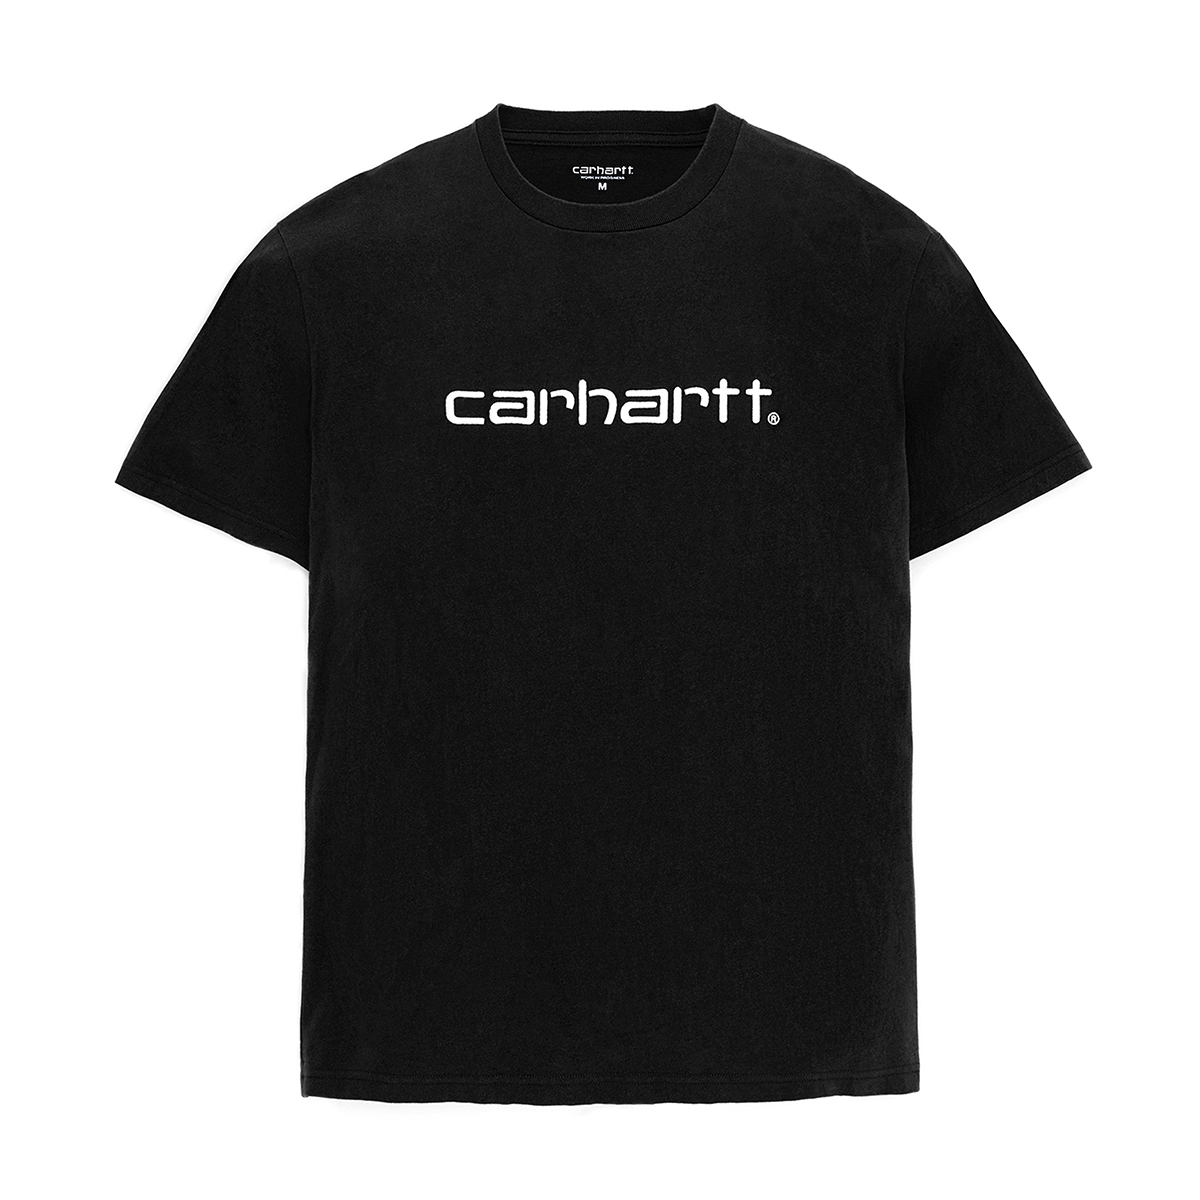 S/S Carhartt Embroidery T-shirt